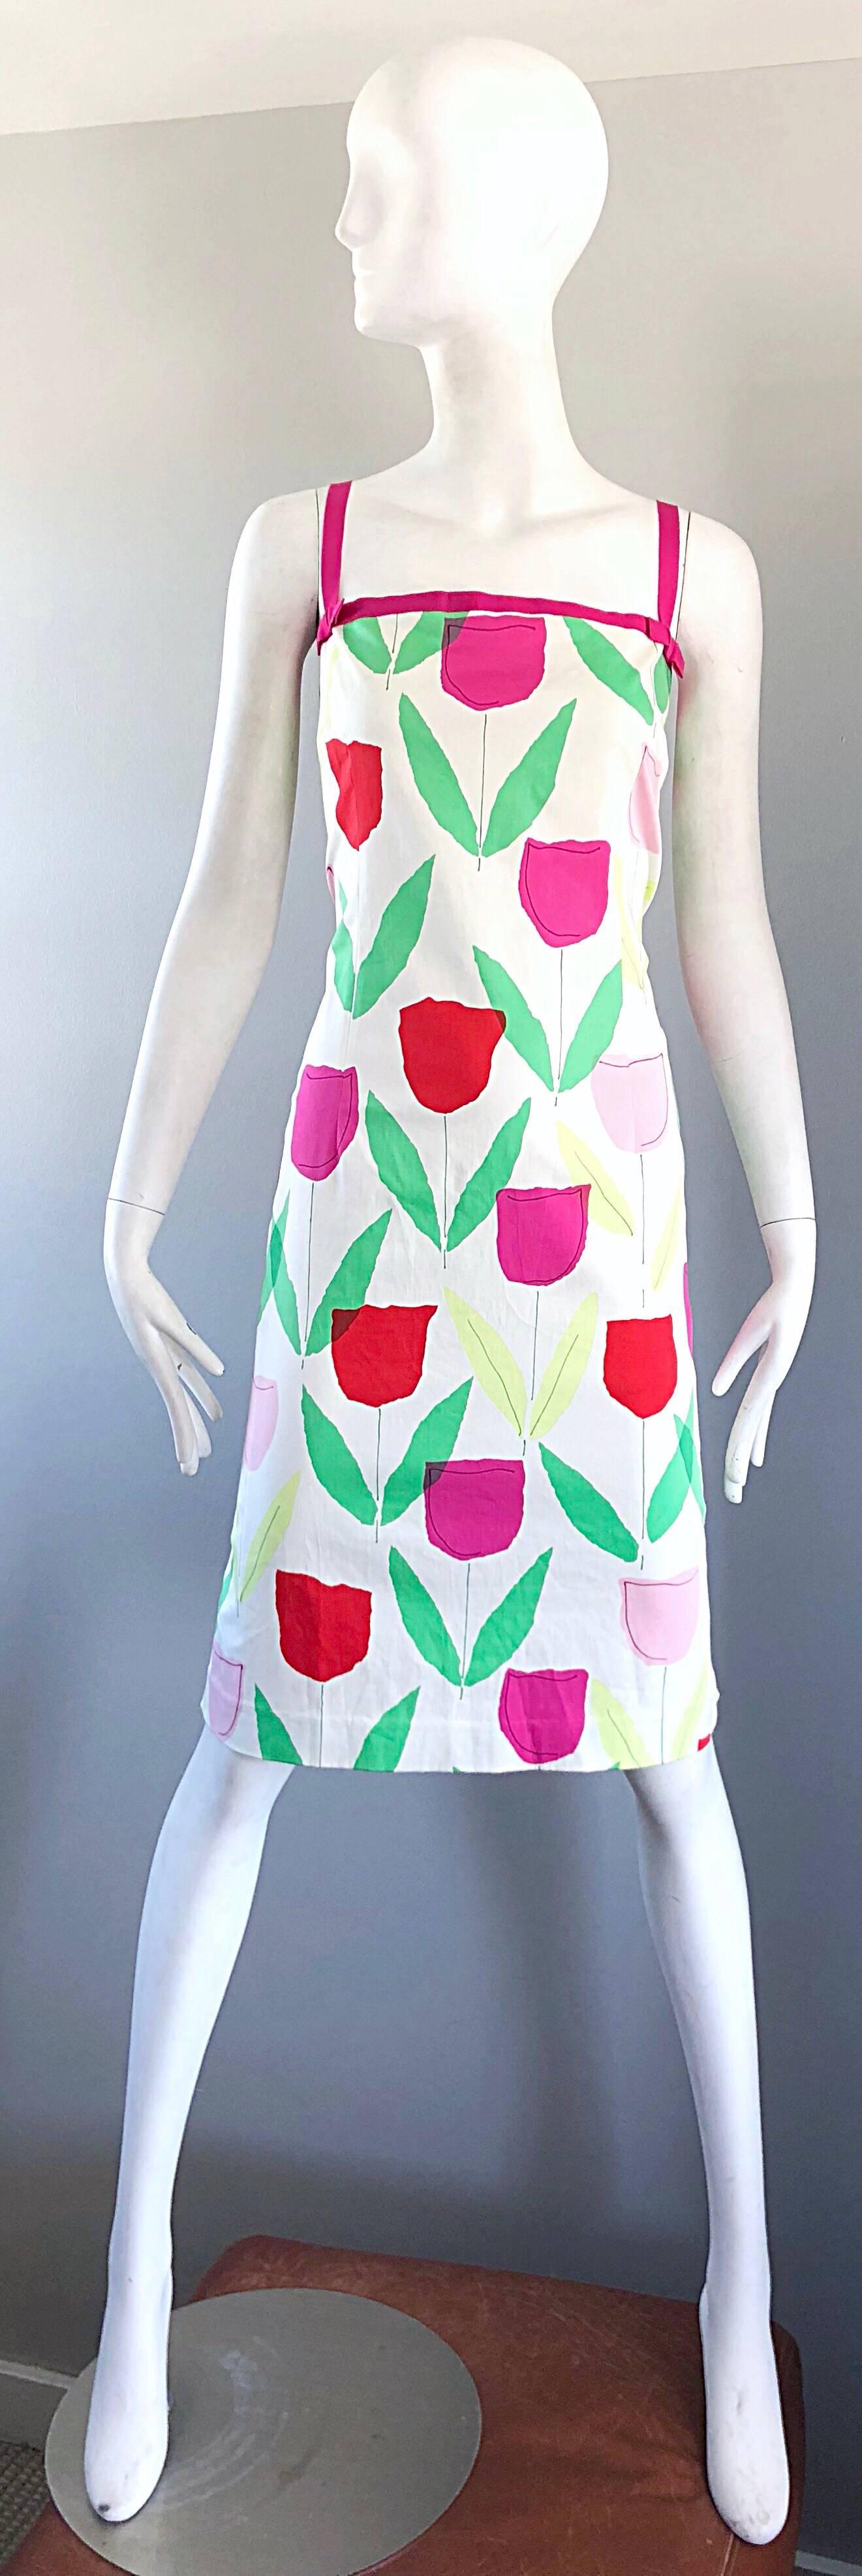 1990s Moschino Cheap & Chic Pink + Red + Green Tulip / Rose Print Vintage Dress 4